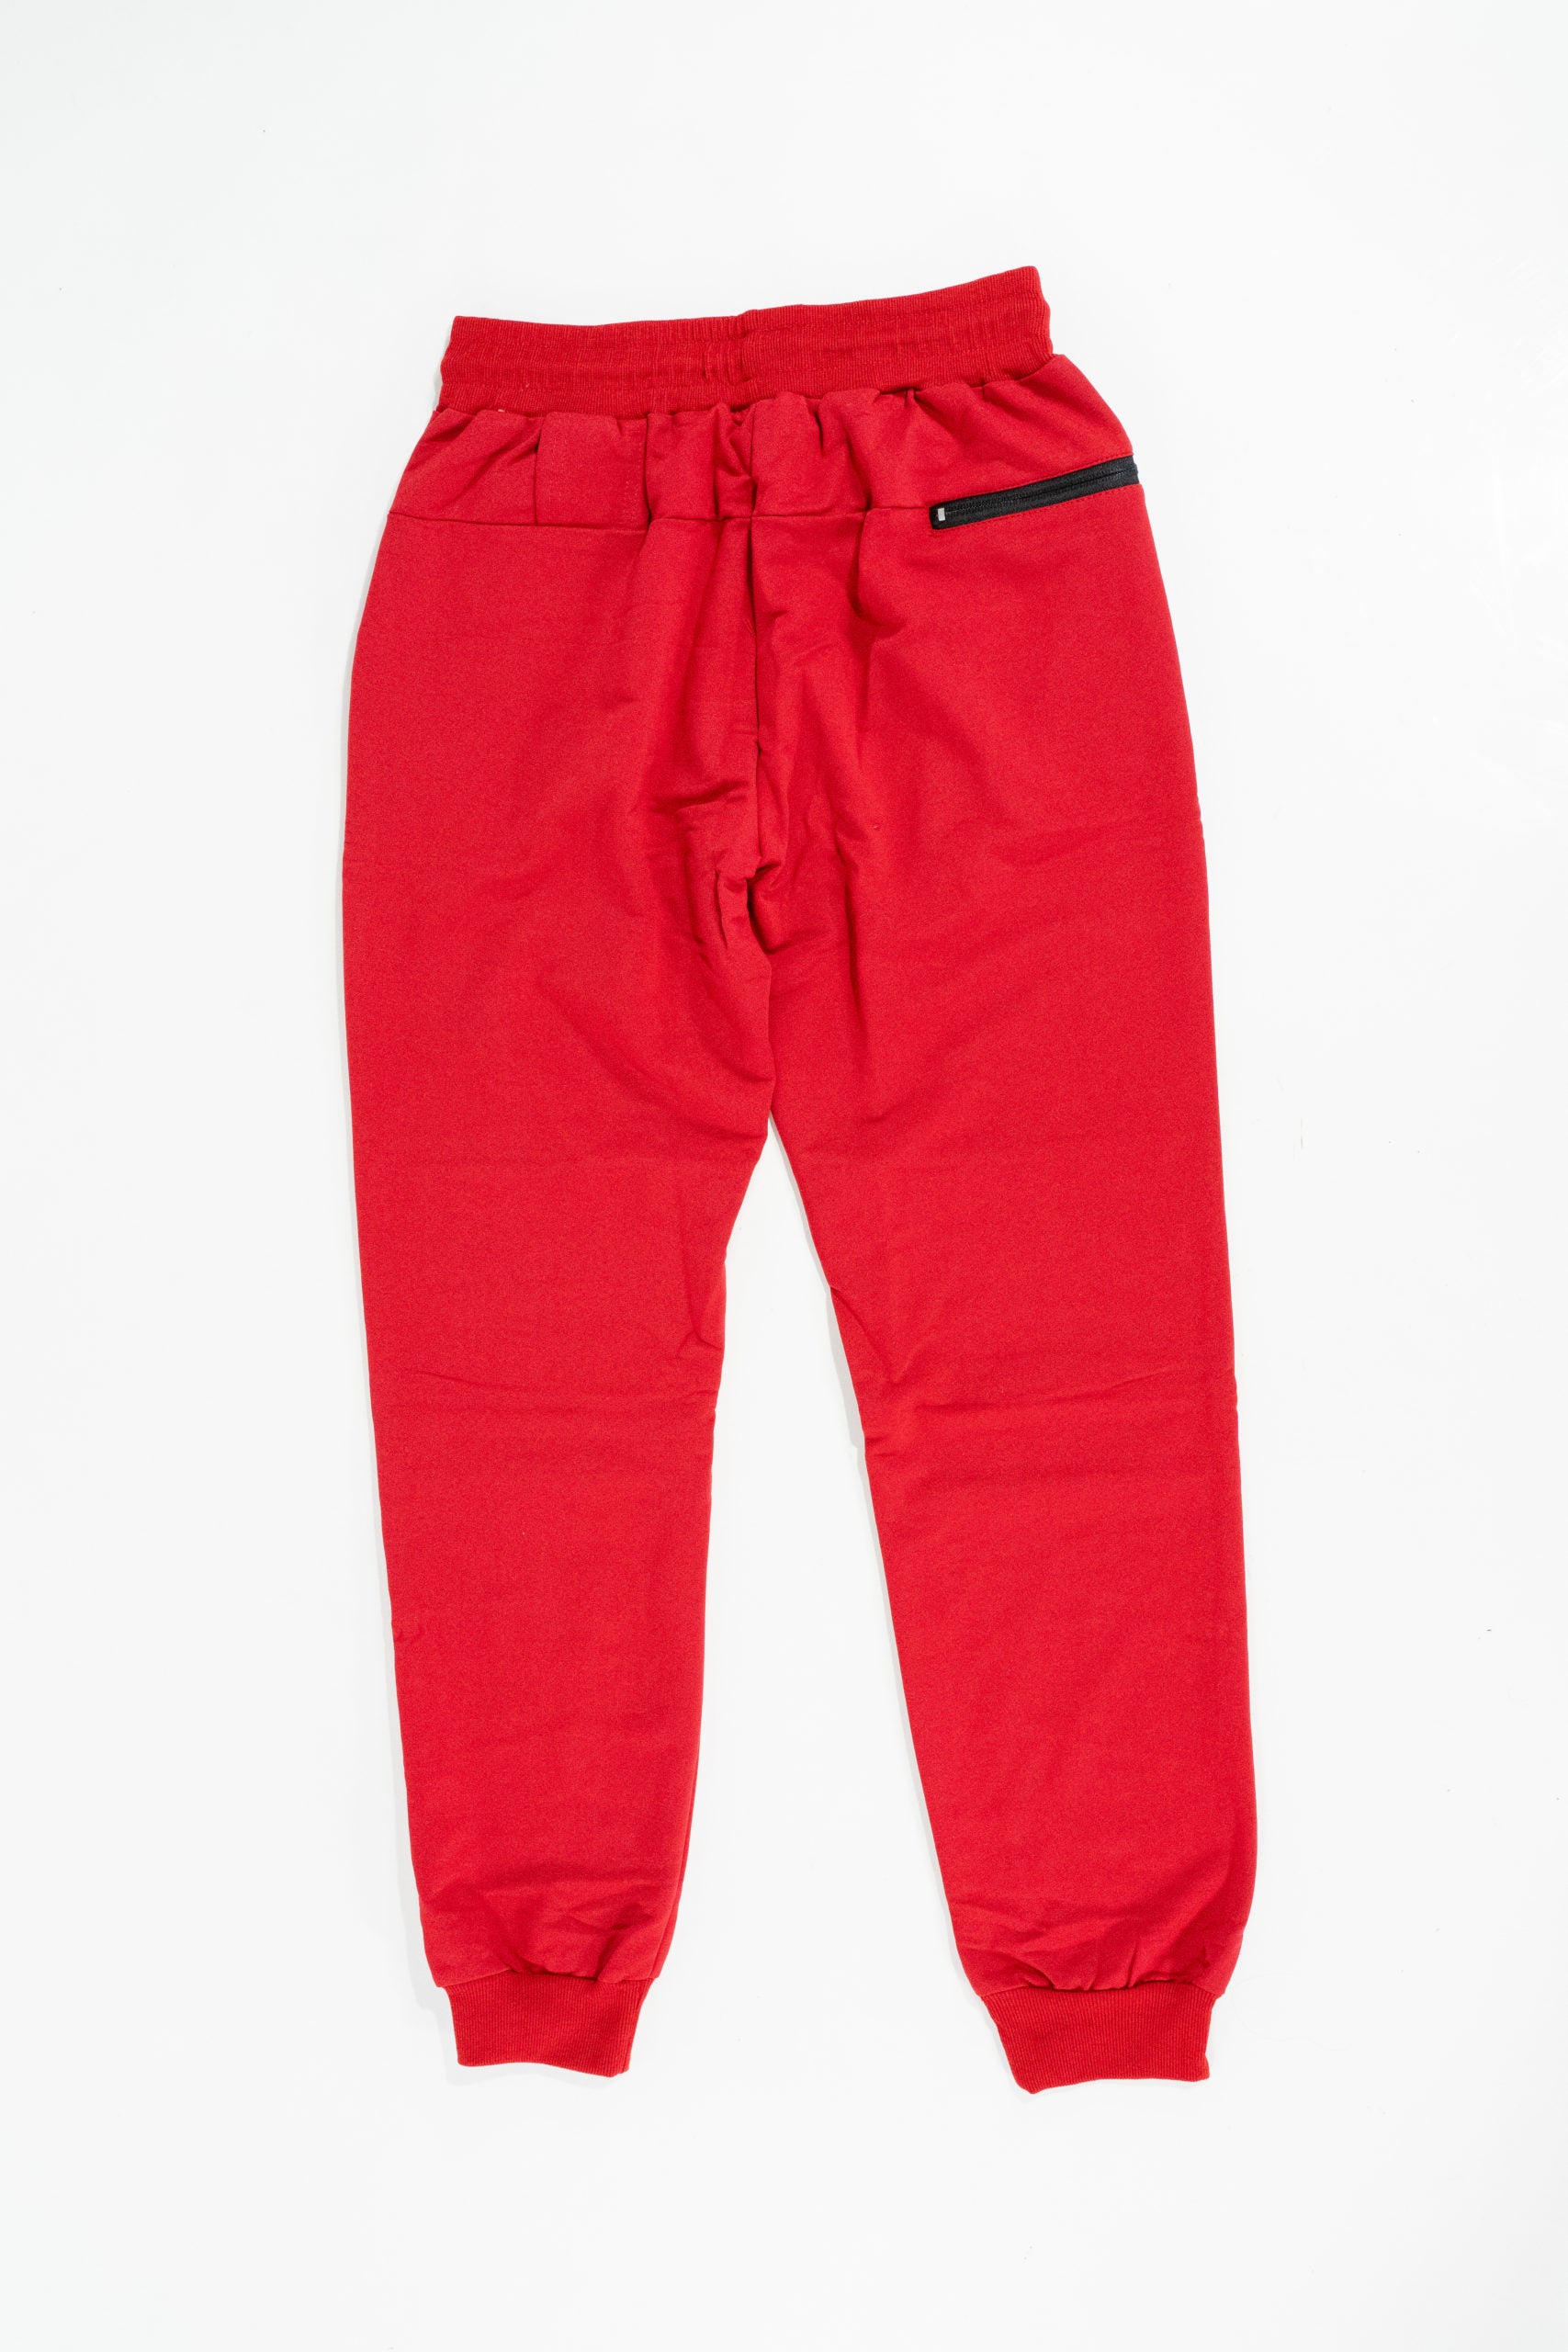 Back view of championship red elite jogger pants